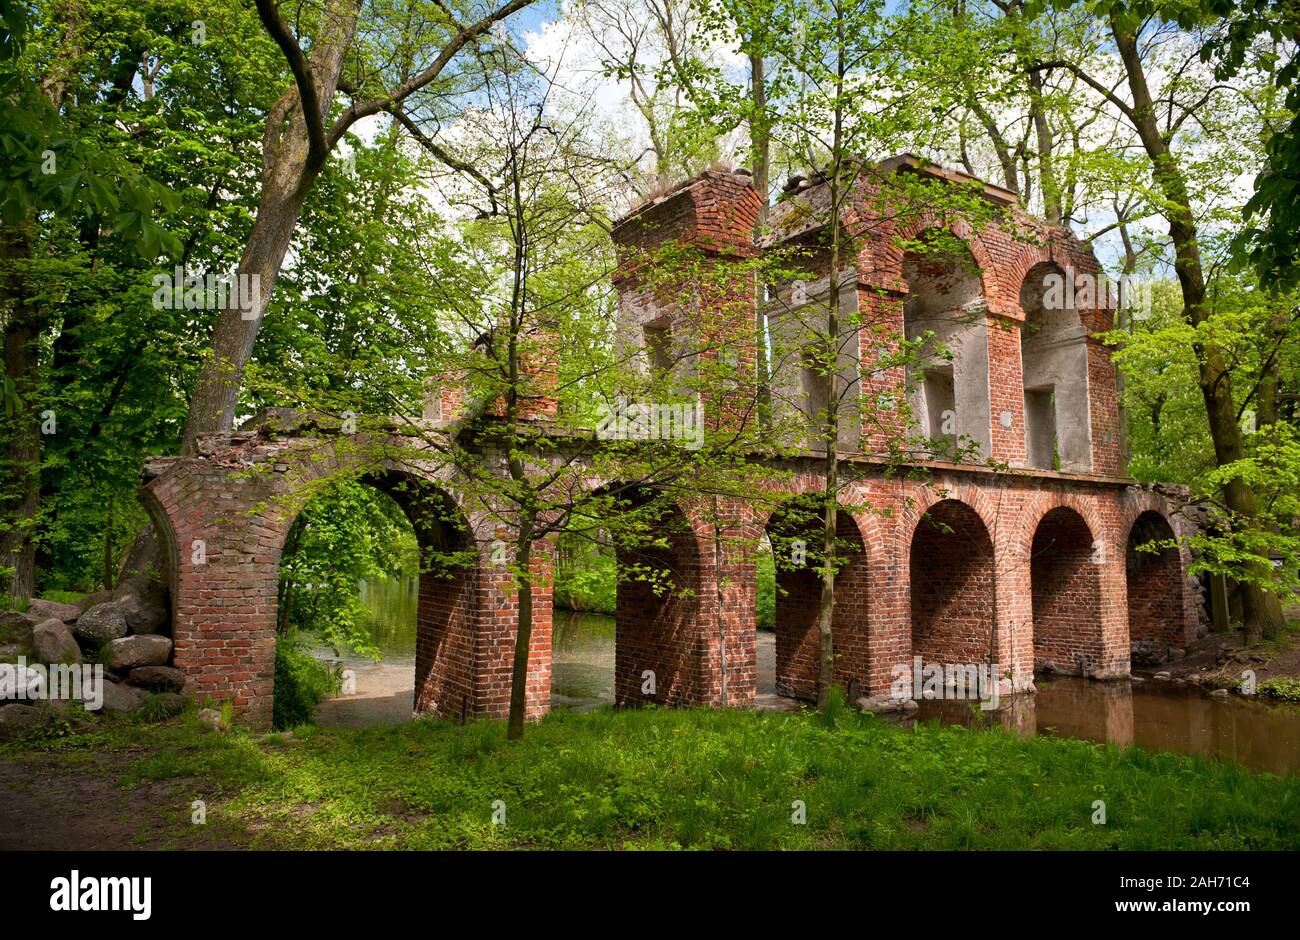 Aqueduct in the Romantic Park in Arkadia, Poland, Europe, reconstructed in 1950-1052. Visiting tourist travel destinations, sightseeing popular place. Stock Photo